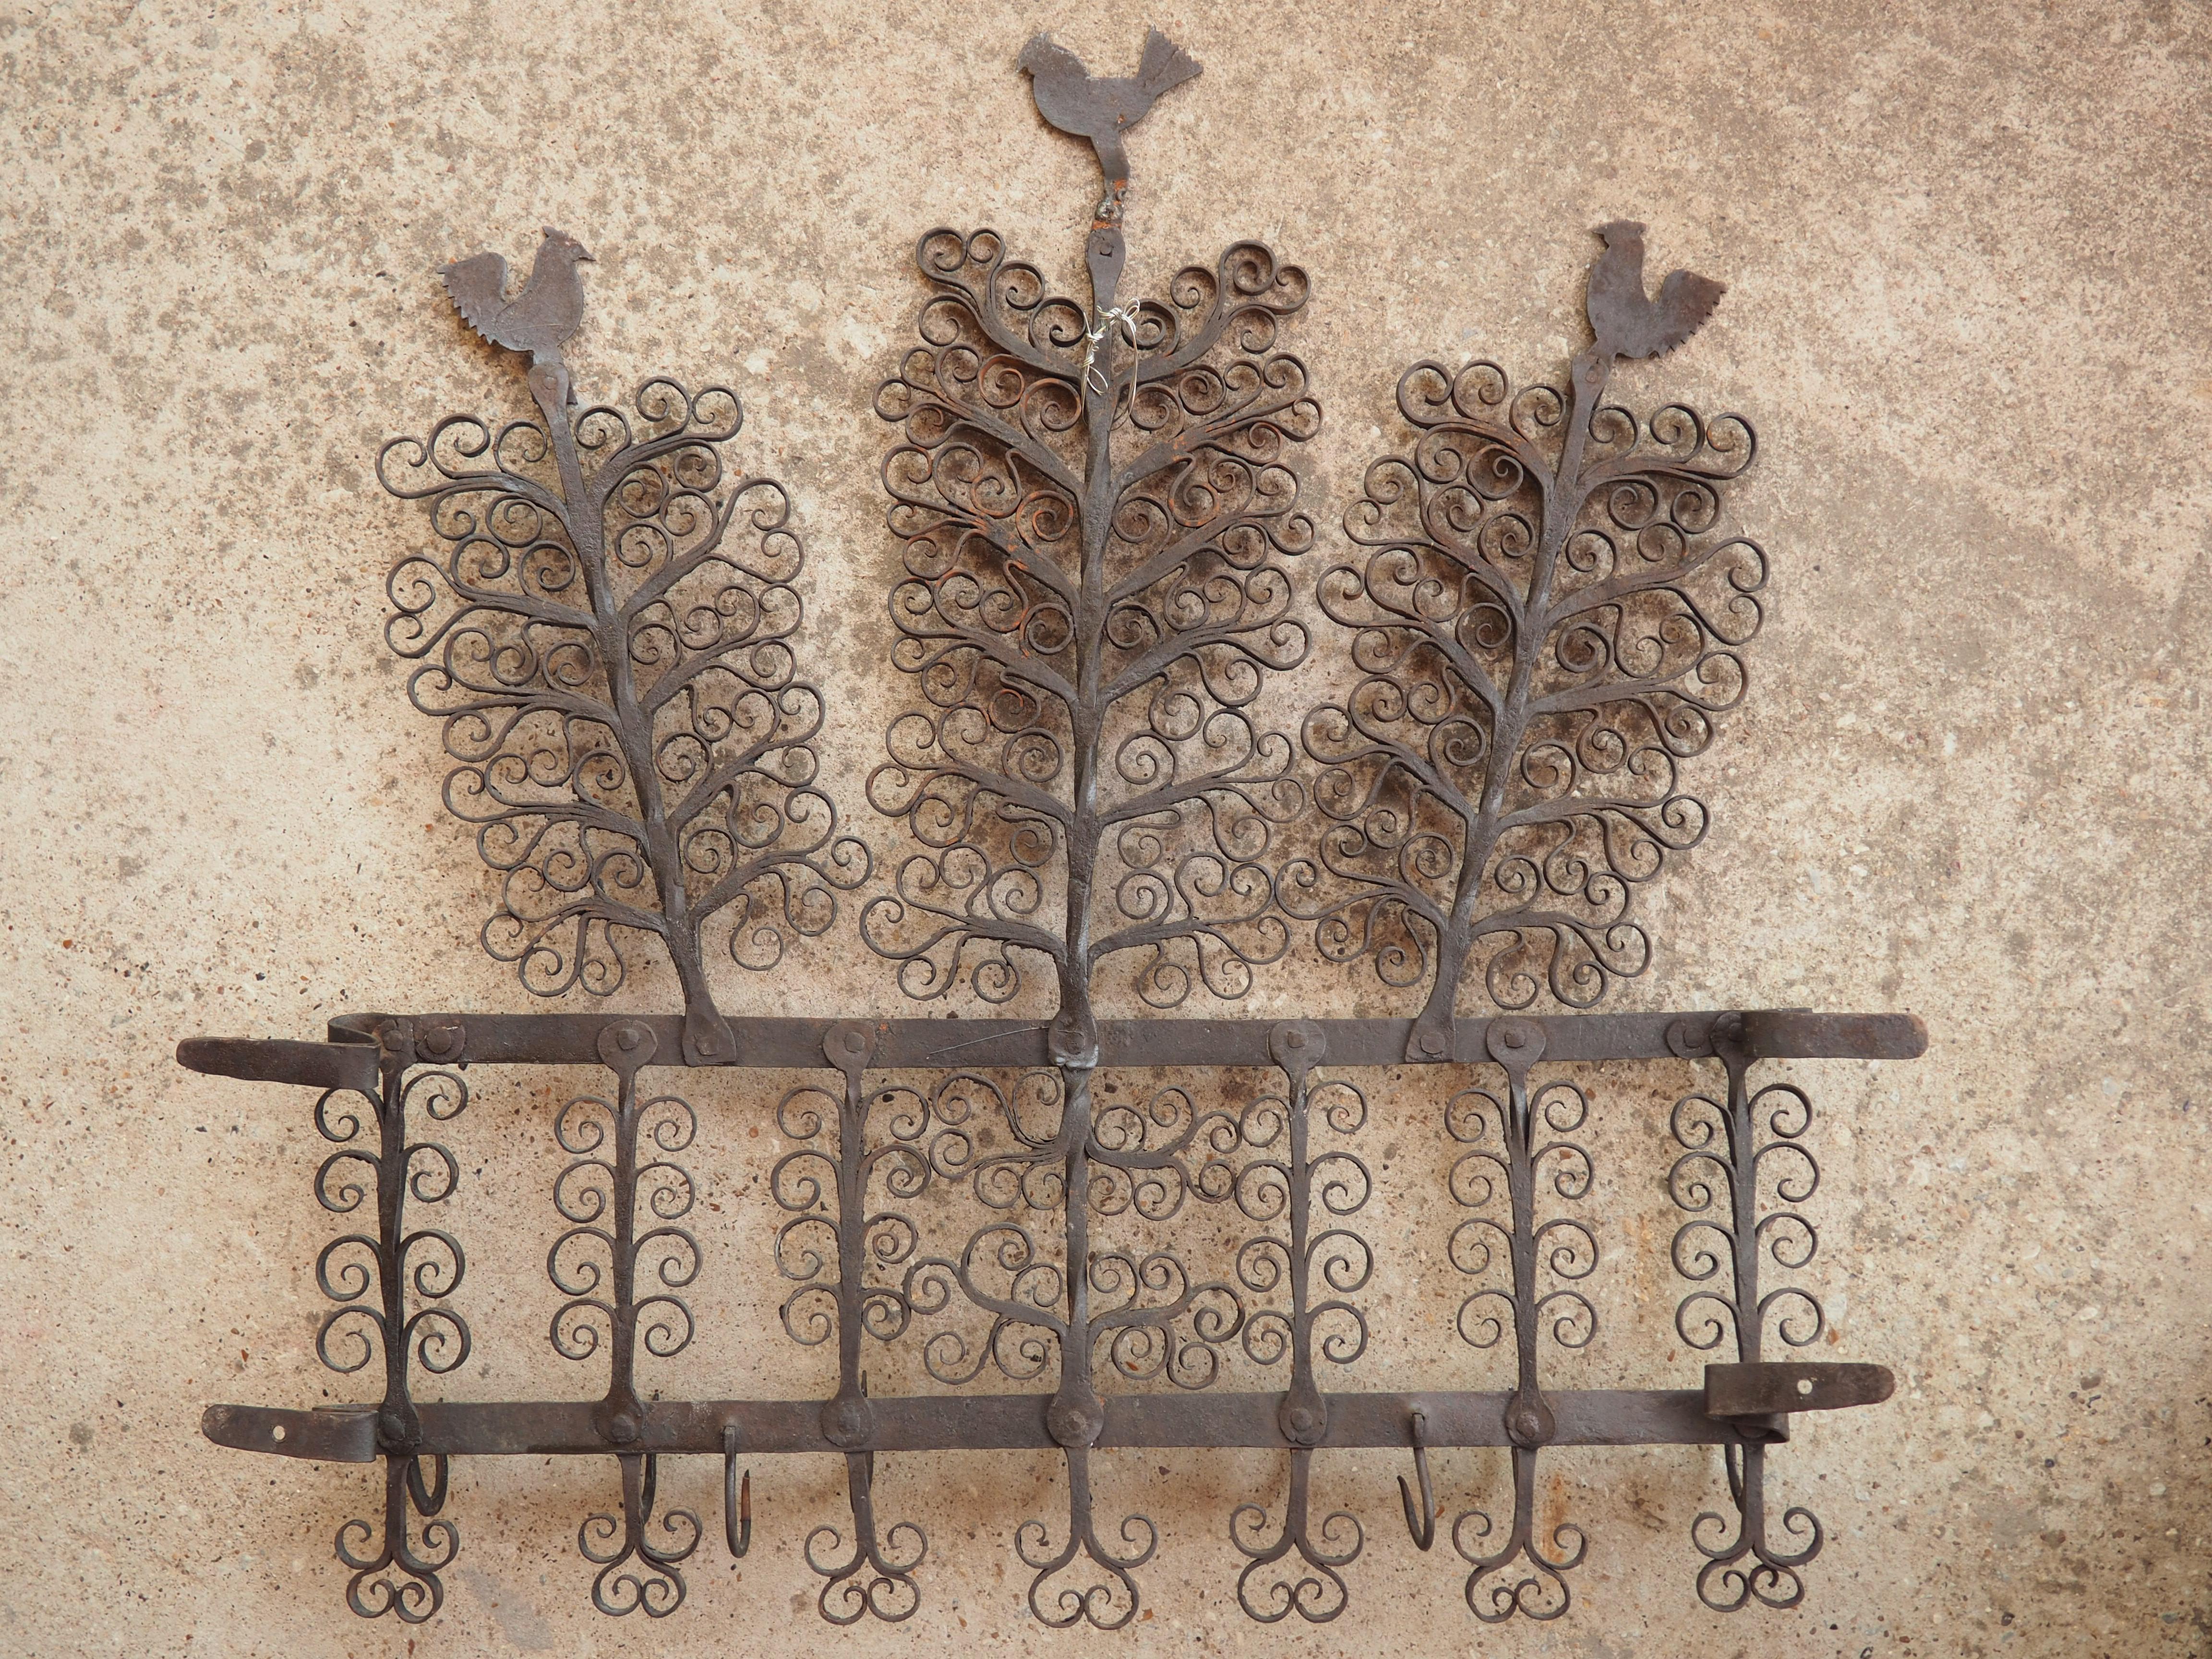 Known as an archelle, this wrought iron kitchen hook rack has rooster and volute scroll motifs. Archelles were hung on the walls of kitchens or service rooms, typically in Northern France and Flanders. The hooks would be used to hold utensils,